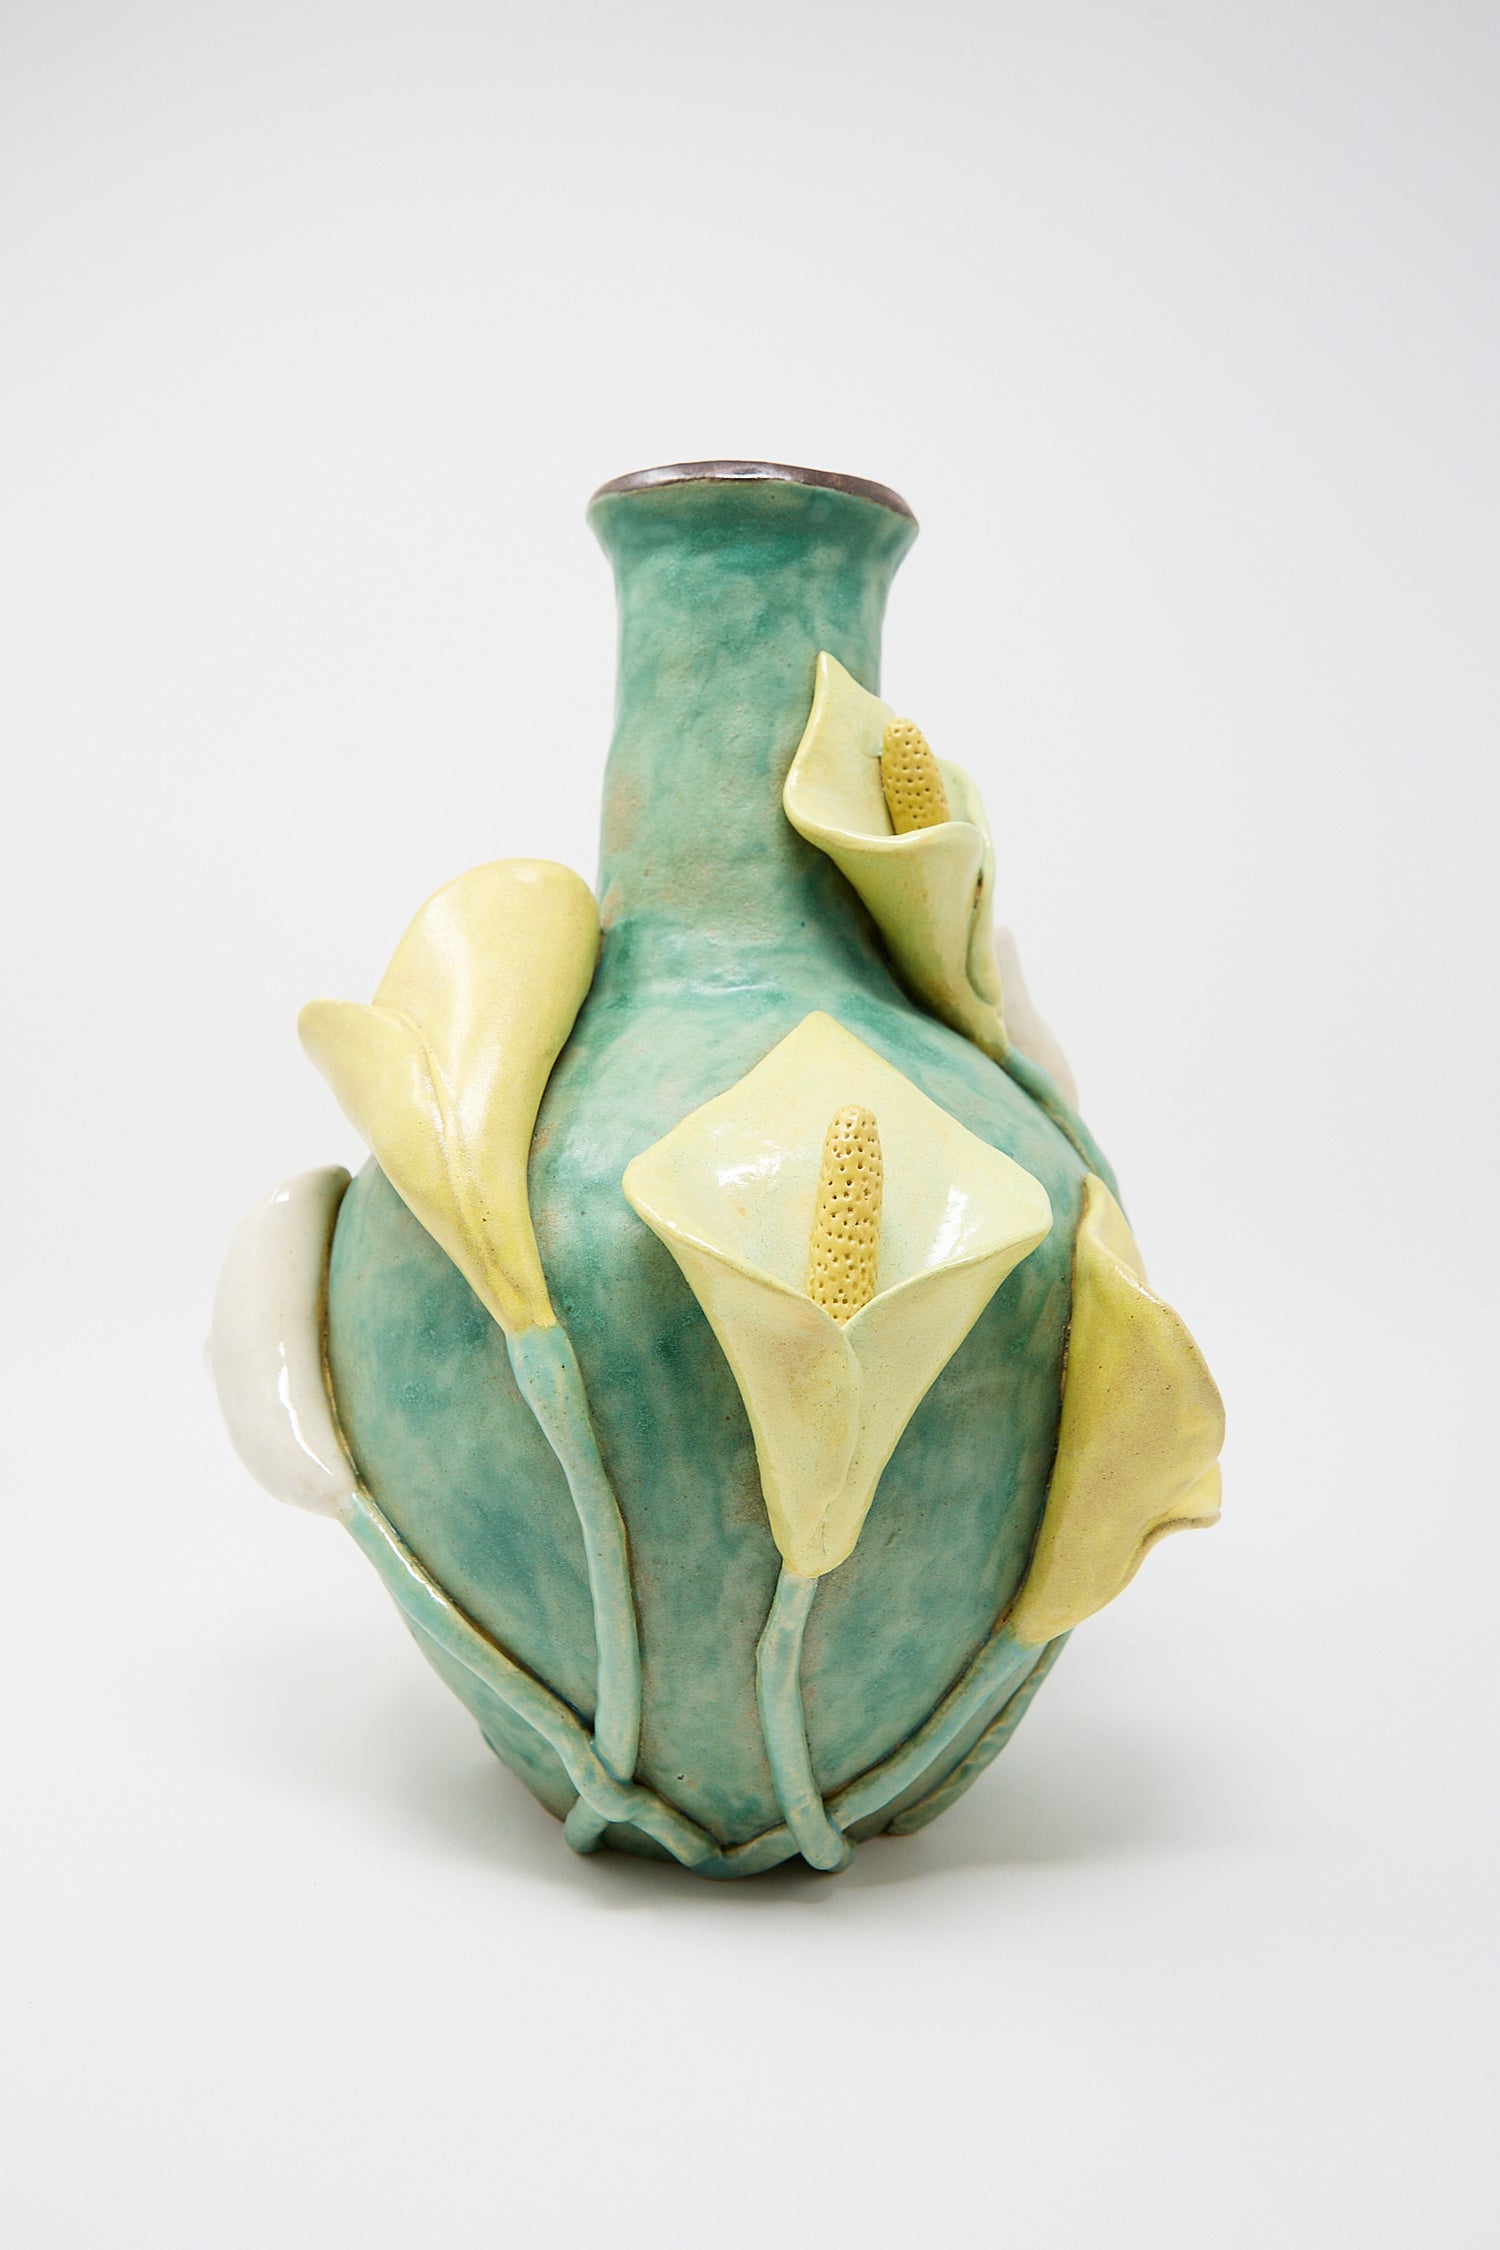 A Pearce Williams ceramic Calla Vase with a turquoise glaze, embellished with sculpted, yellow and white calla lilies on its surface.